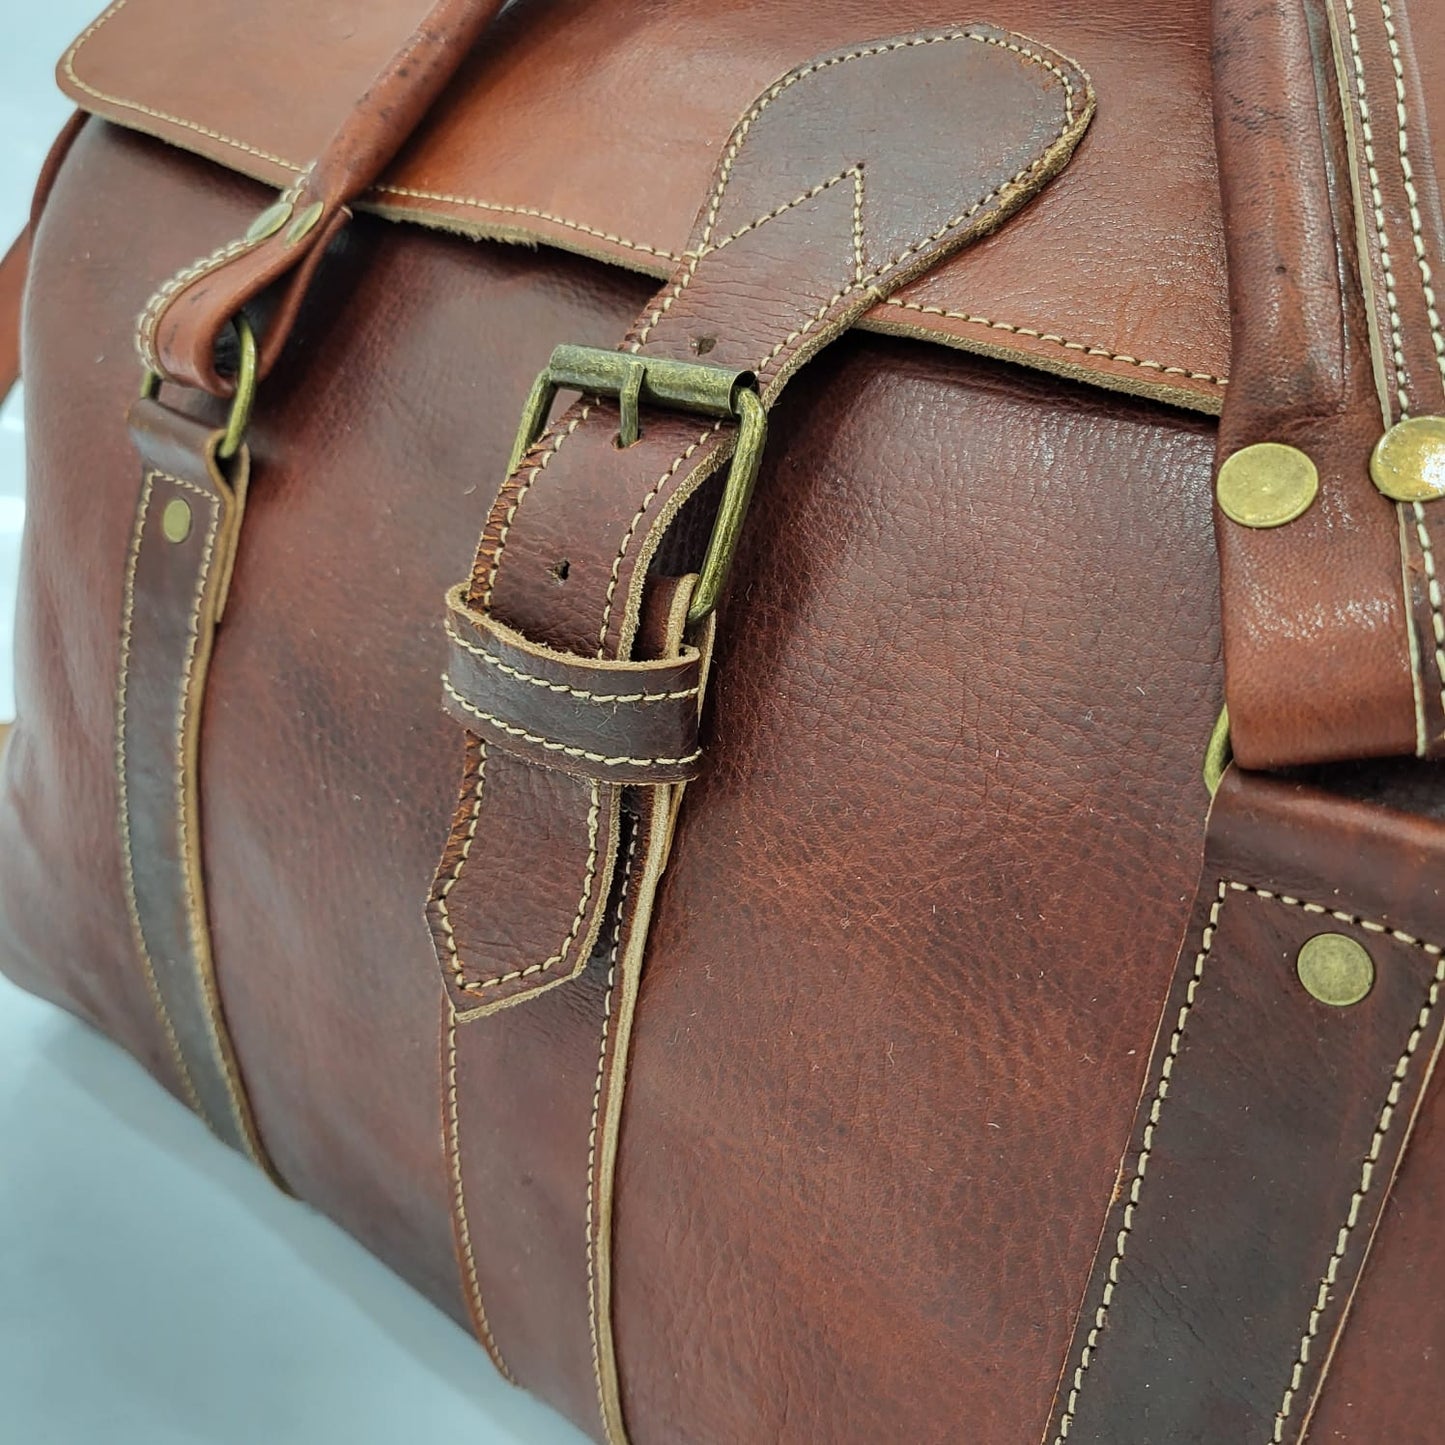 Experience Luxury in Every Detail Moroccan Leather Travel Bags for Men